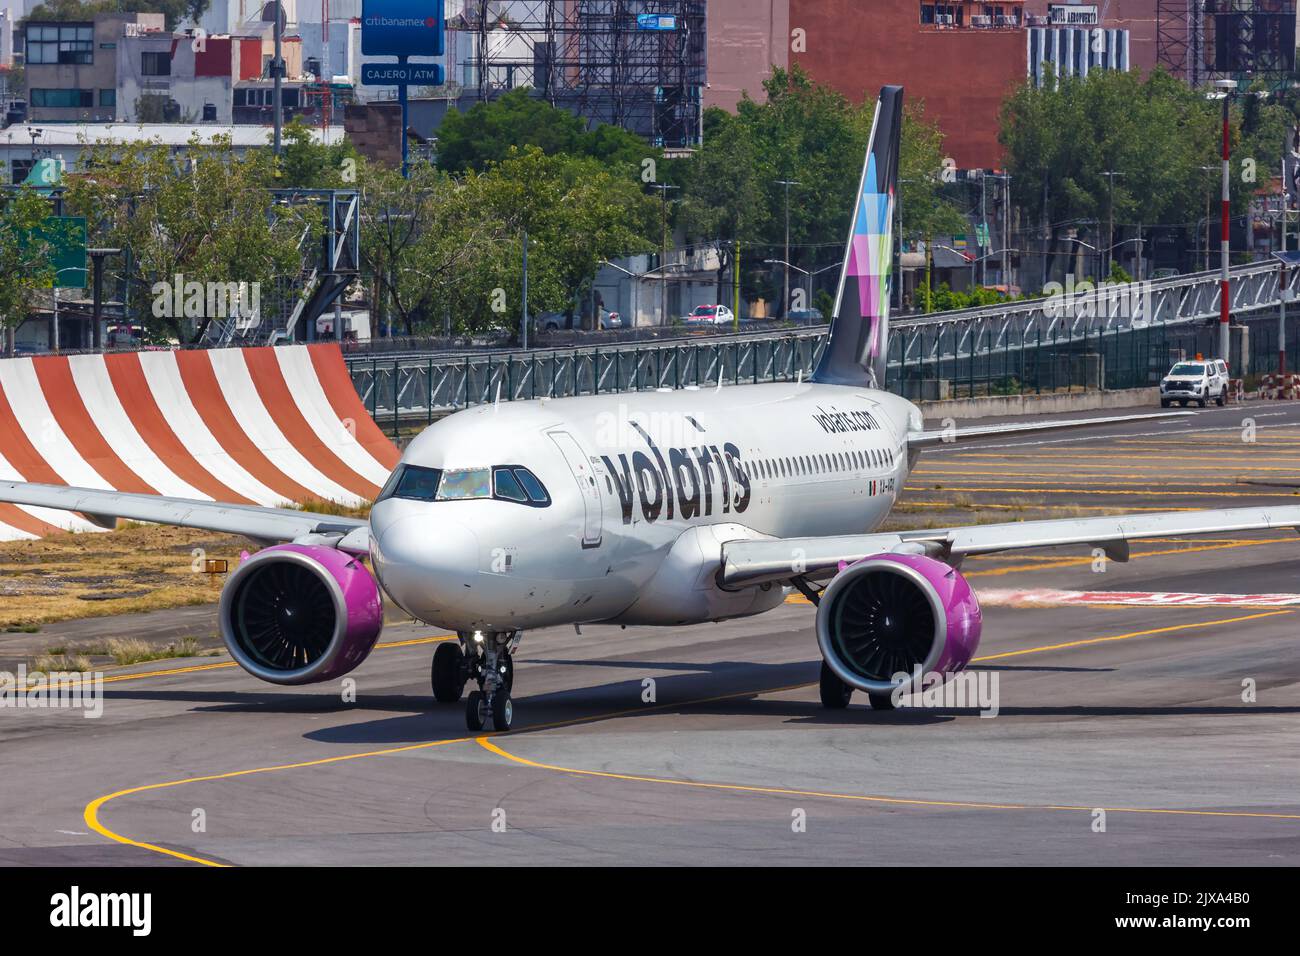 Mexico City, Mexico - April 14, 2022: Volaris Airbus A320neo airplane at Mexico City airport (MEX) in Mexico. Stock Photo